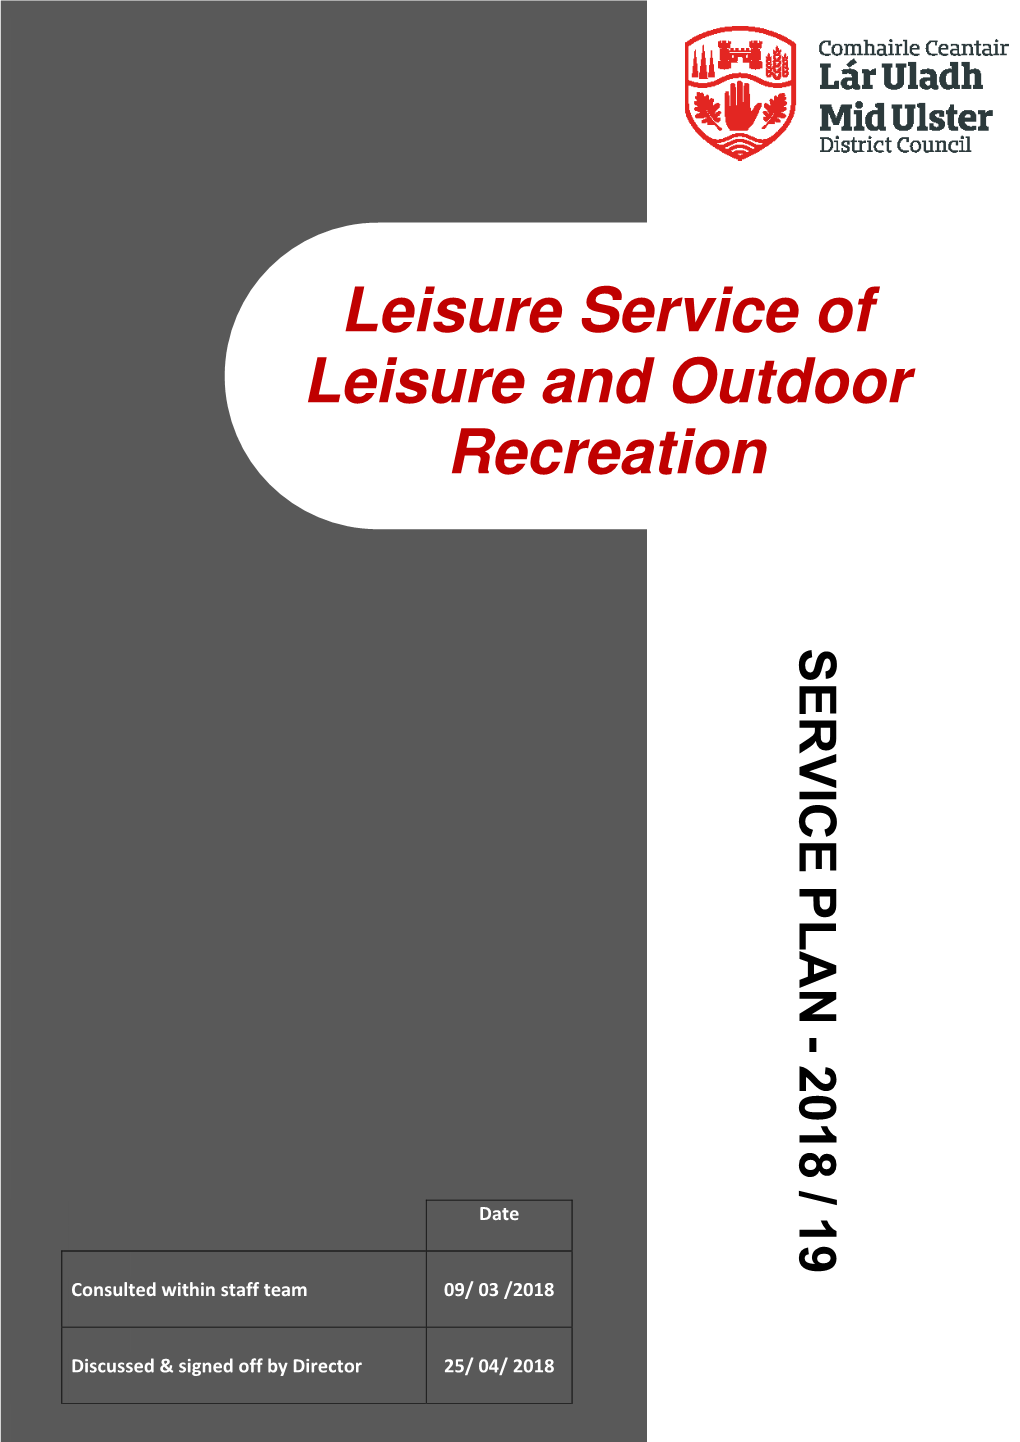 Leisure Service of Leisure and Outdoor Recreation